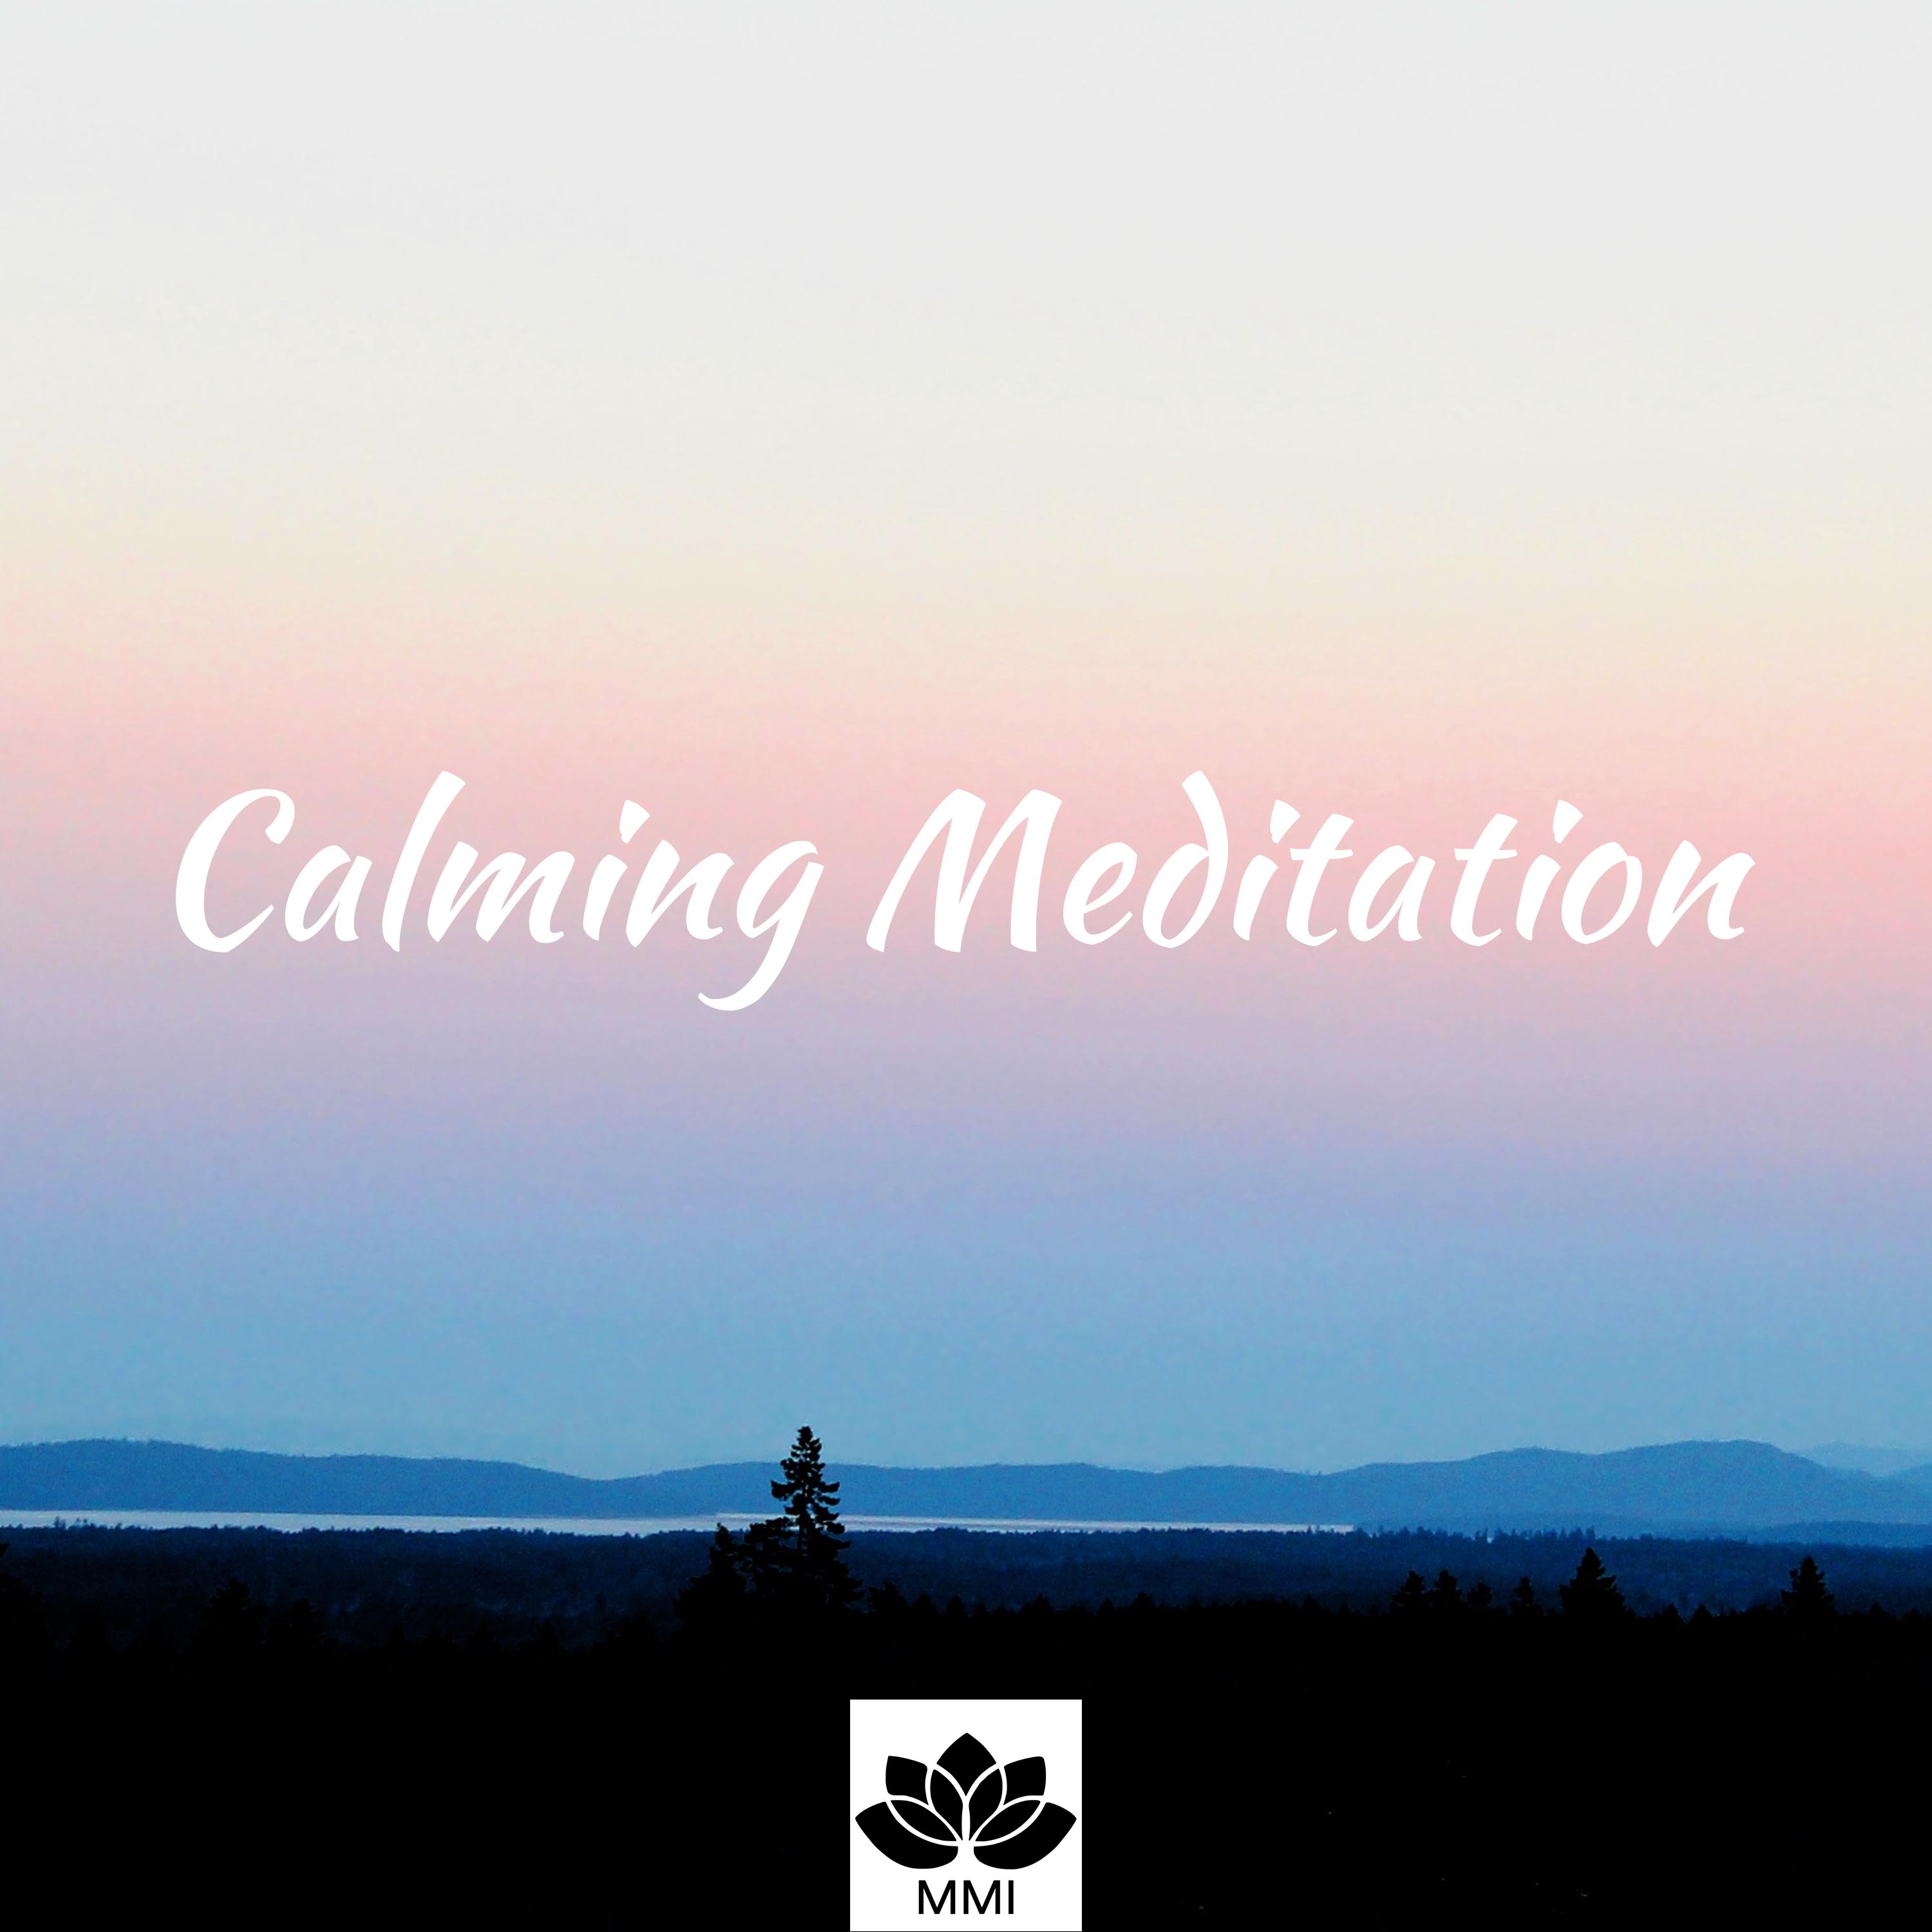 Calming Meditation - Calm Music for Deep Peace, Tranquility and Serenity